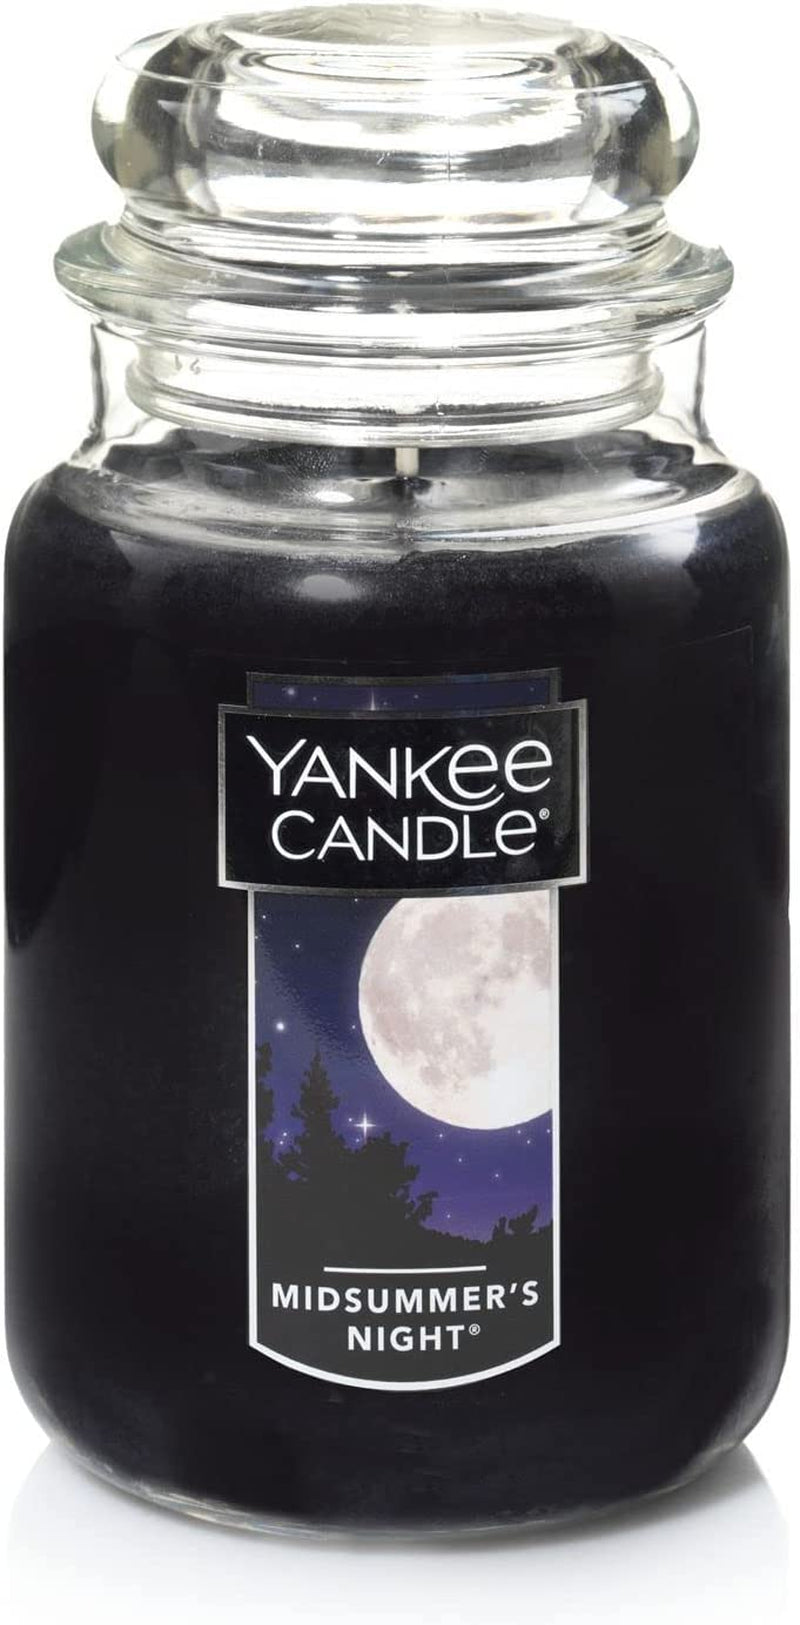 Yankee Candle Midsummer'S Night Scented, Classic 22Oz Large Jar Single Wick Candle, over 110 Hours of Burn Time